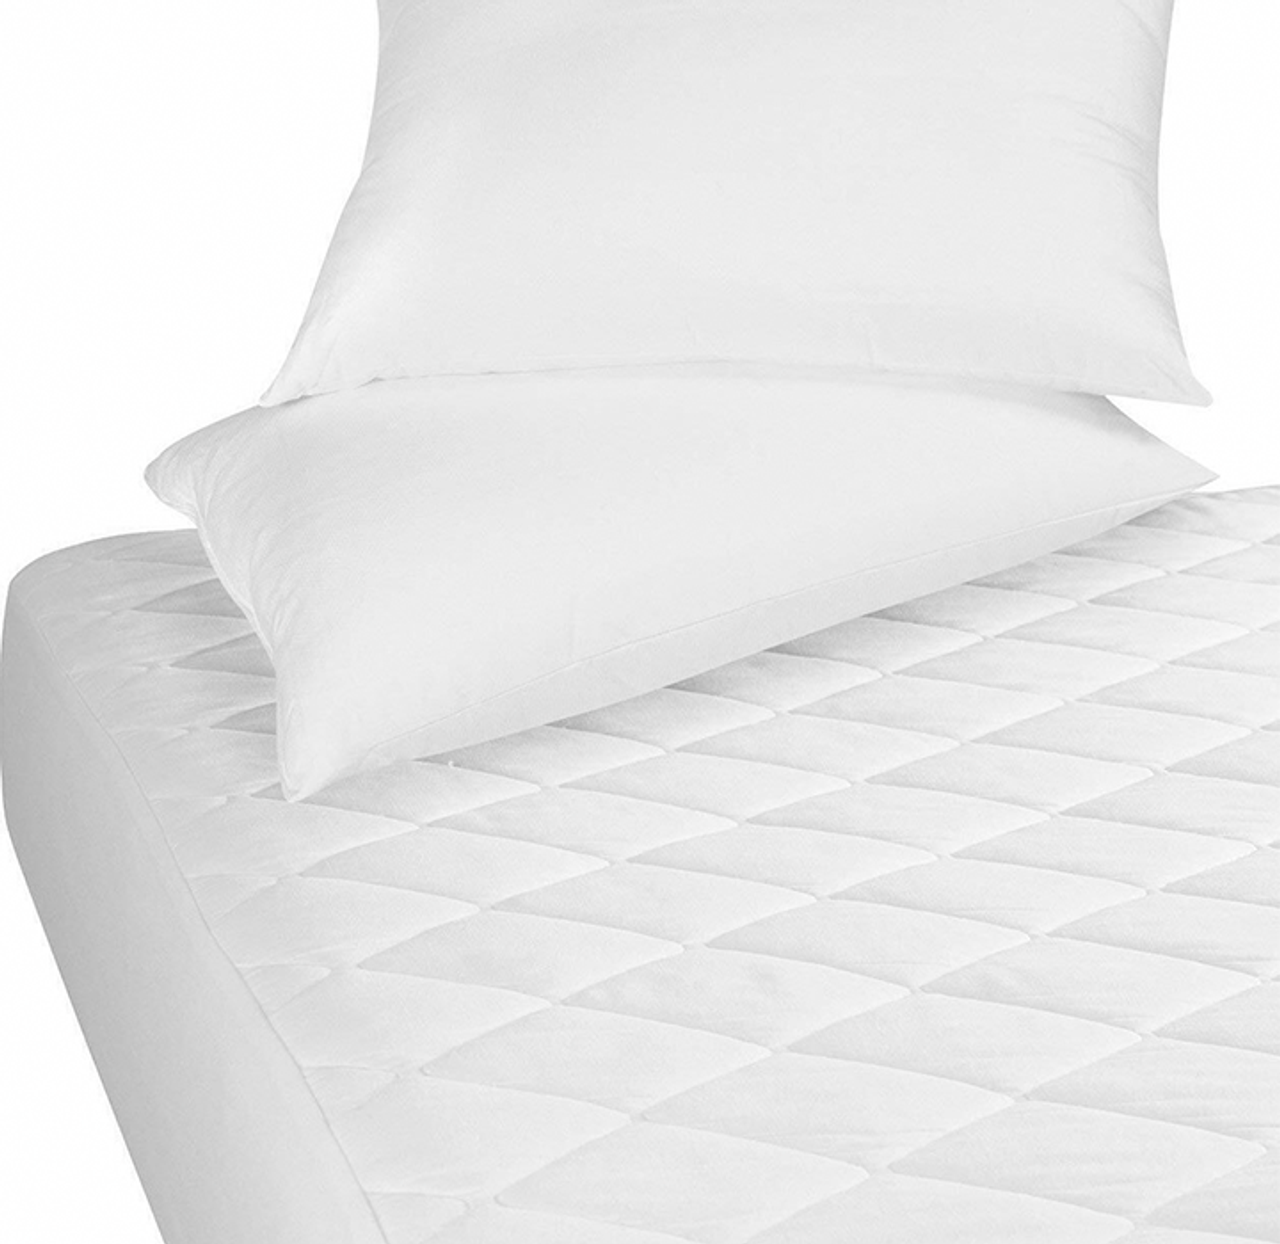 Beauty Sleep™ Ultra-Soft Hypoallergenic Quilted Mattress Pad product image